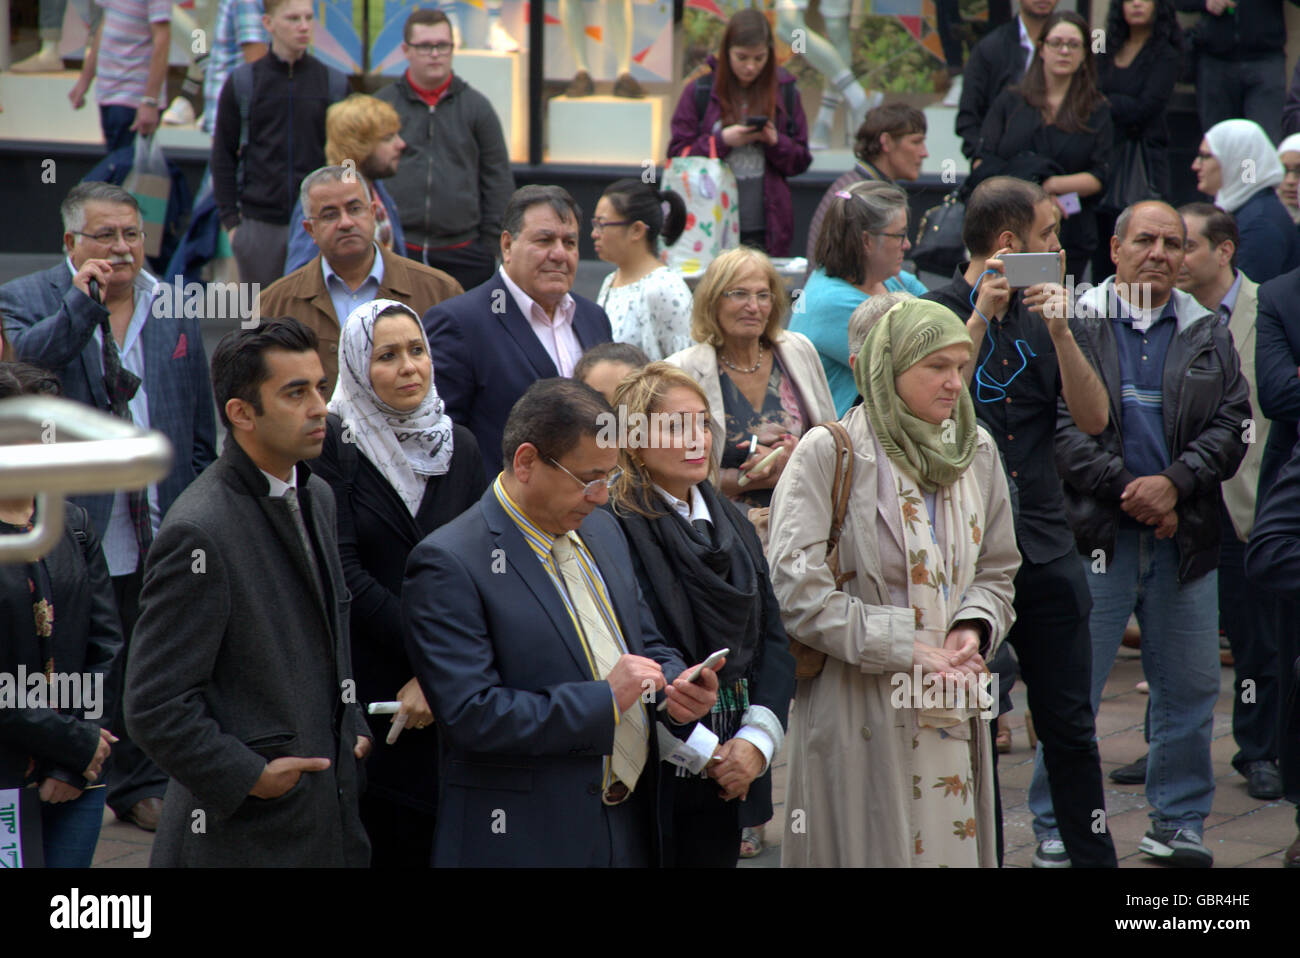 Glasgow, Scotland, UK 7th July 2016. Scottish Iraqi Association hold a candlelit vigil to commemorate the hundreds of innocent Iraqi civilians who lost their lives in the recent atrocious bombings in Karrada, Baghdad during the month of Ramadan and all victims of terrorist attacks and bombings around the world. Attended by local Iraqi dignitaries, as well as  Frank McAveety the leader of Glasgow district council and Humza Yousaf The Minister for Transport and the Islands in the Scottish parliament for the S.N.P. Credit:  Gerard Ferry/Alamy Live News Stock Photo